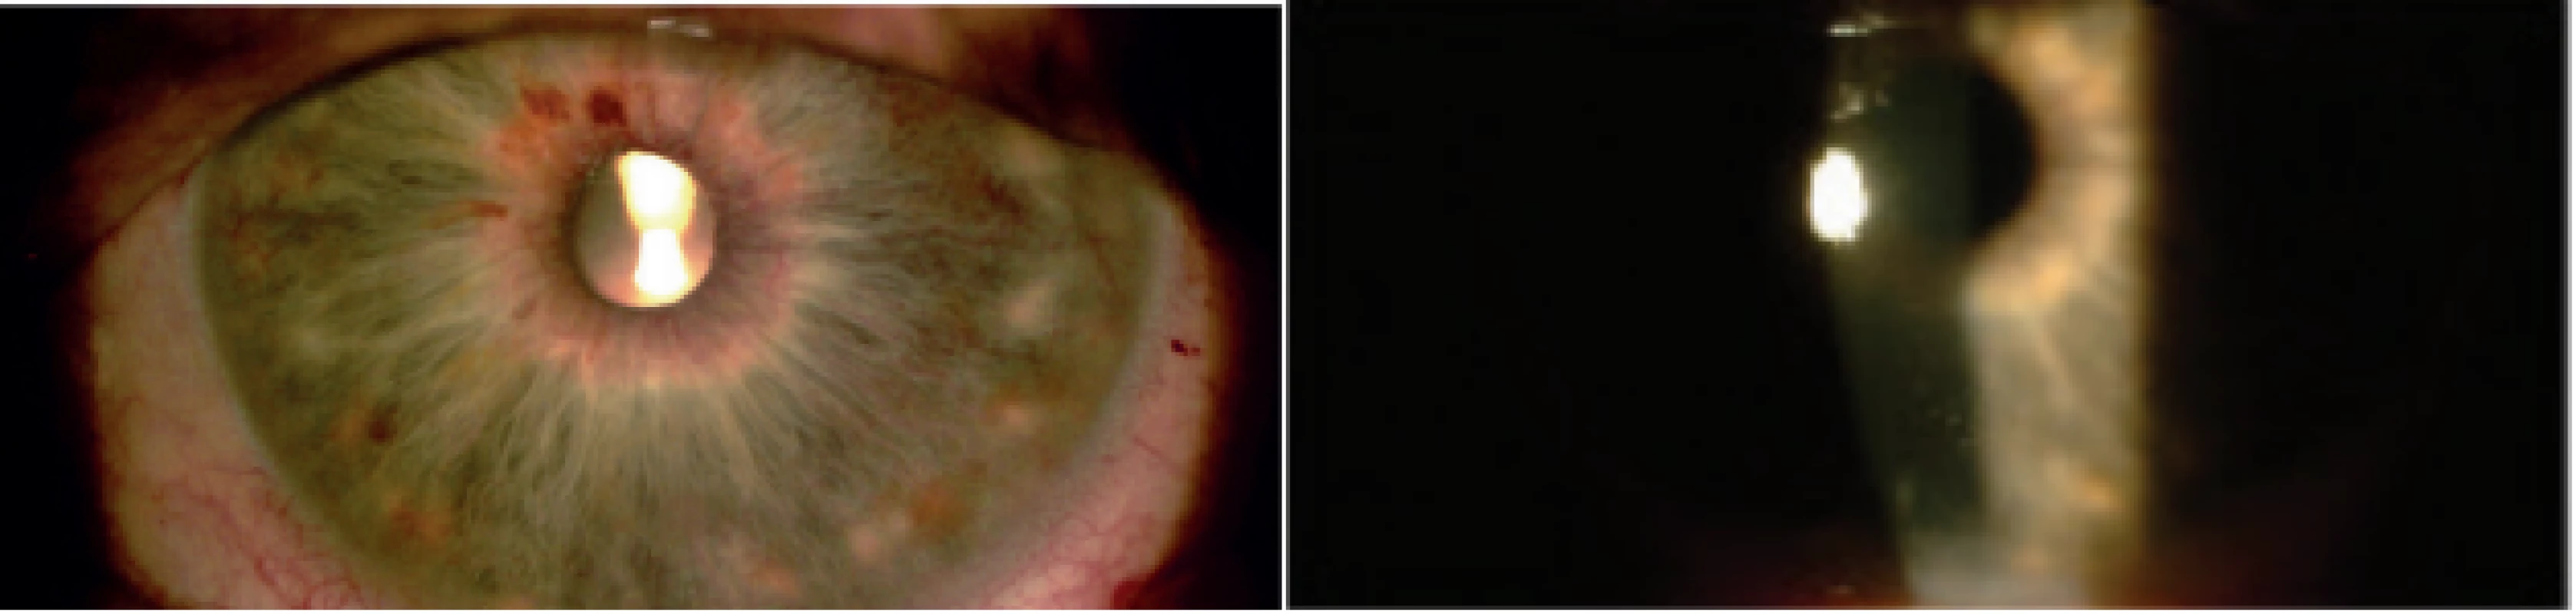 Slight postoperative uveitis. Visible dilatation of vessels of iris and precipitates on cornea visible on first day after cyclophotocoagulation